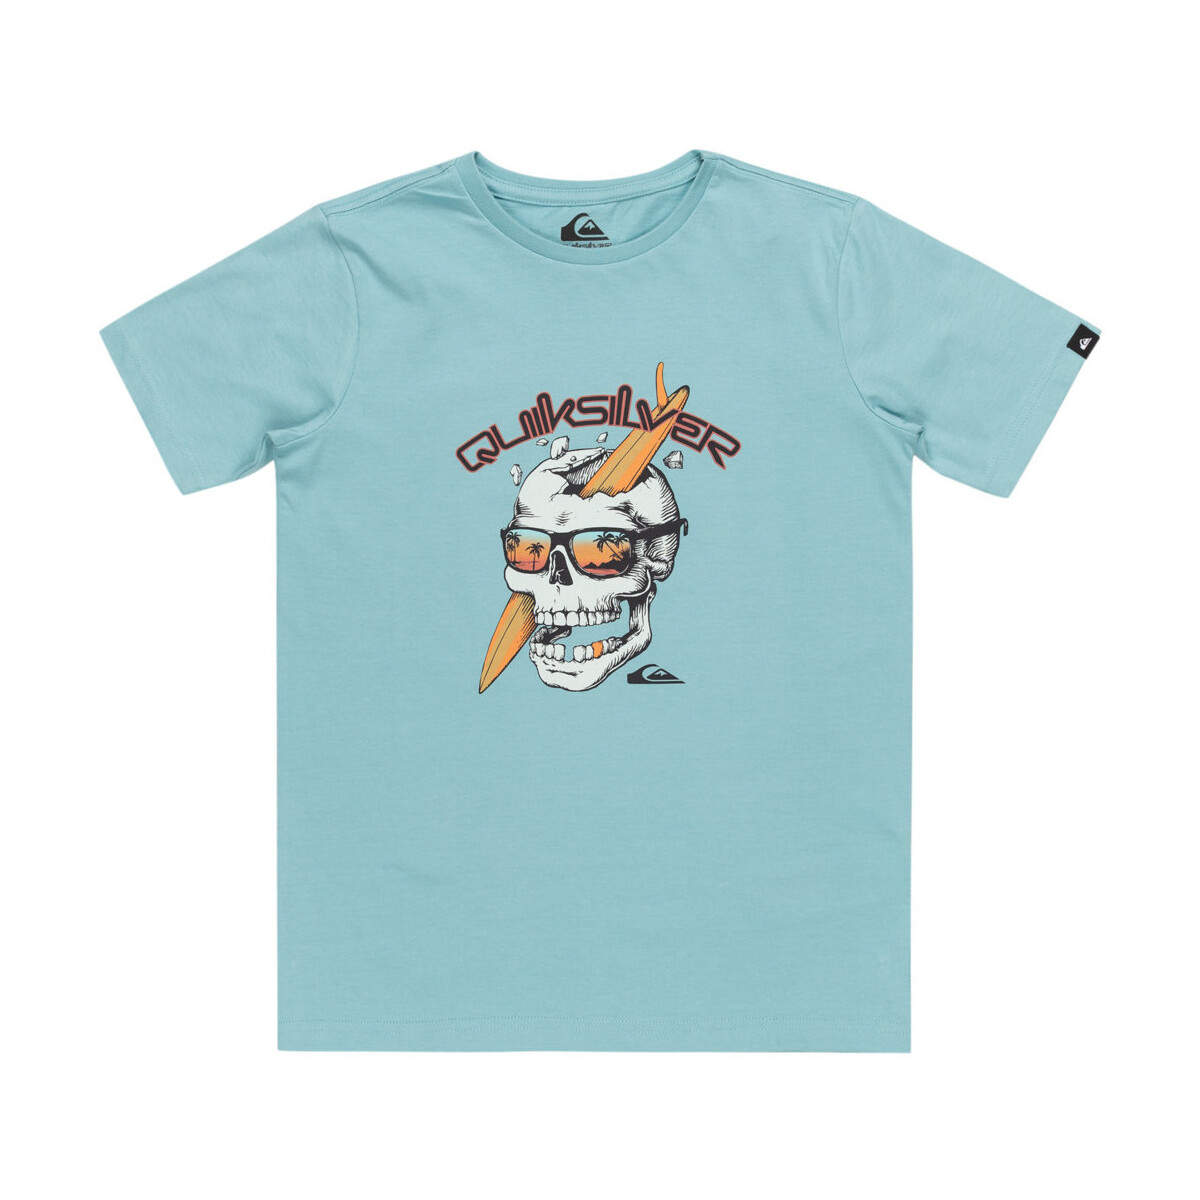 Quiksilver Bleu One Last Surf thq4YP0g